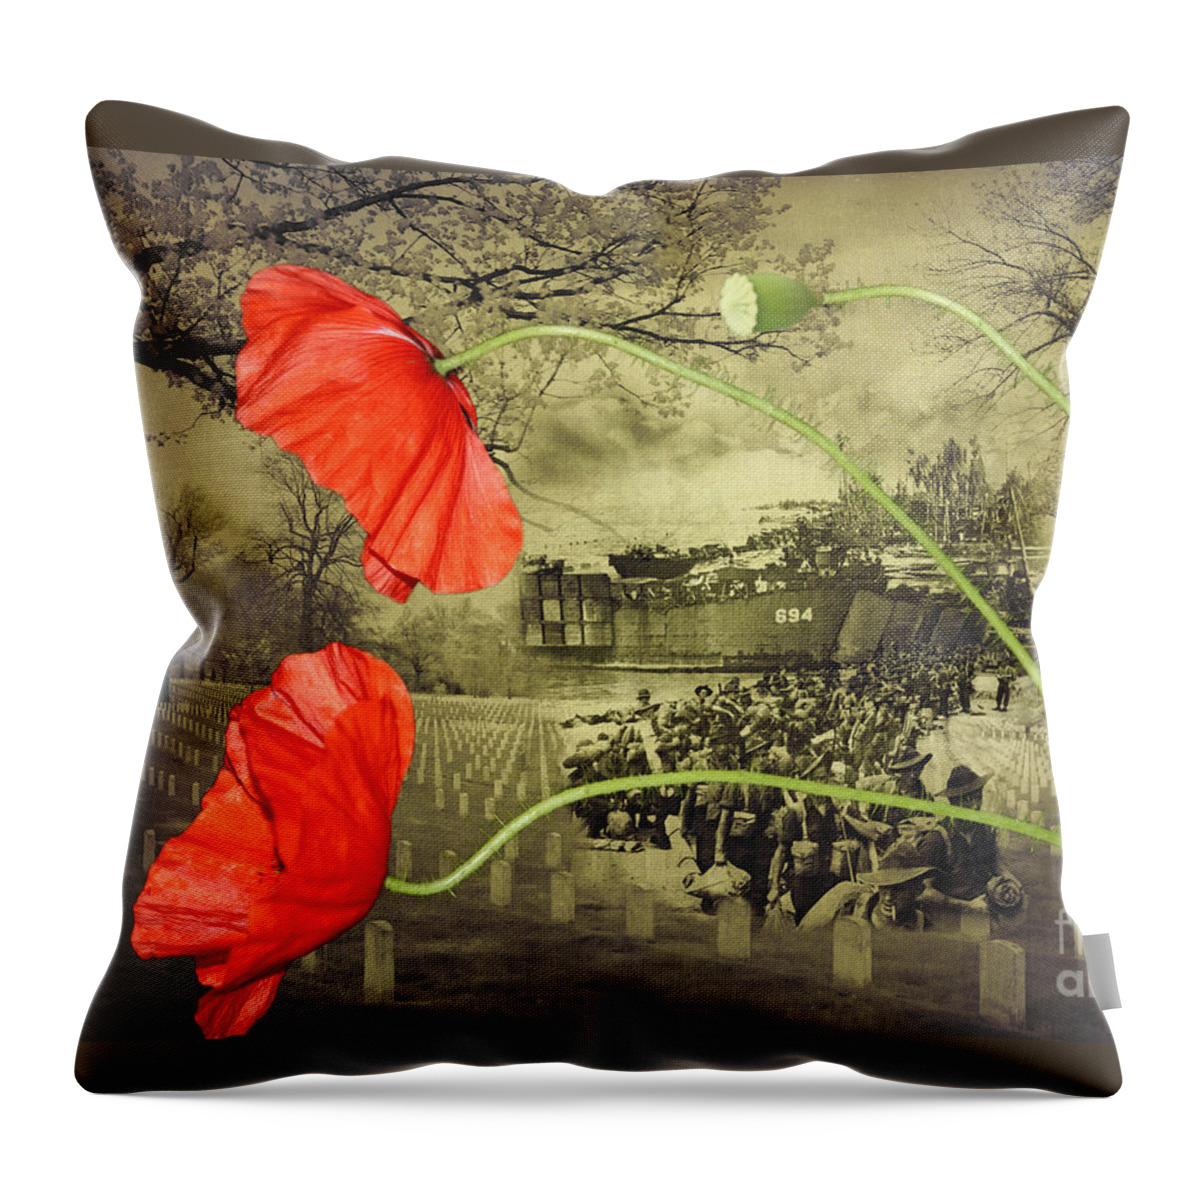 Remembrance Day Throw Pillow featuring the digital art Remembrance by Linda Lees